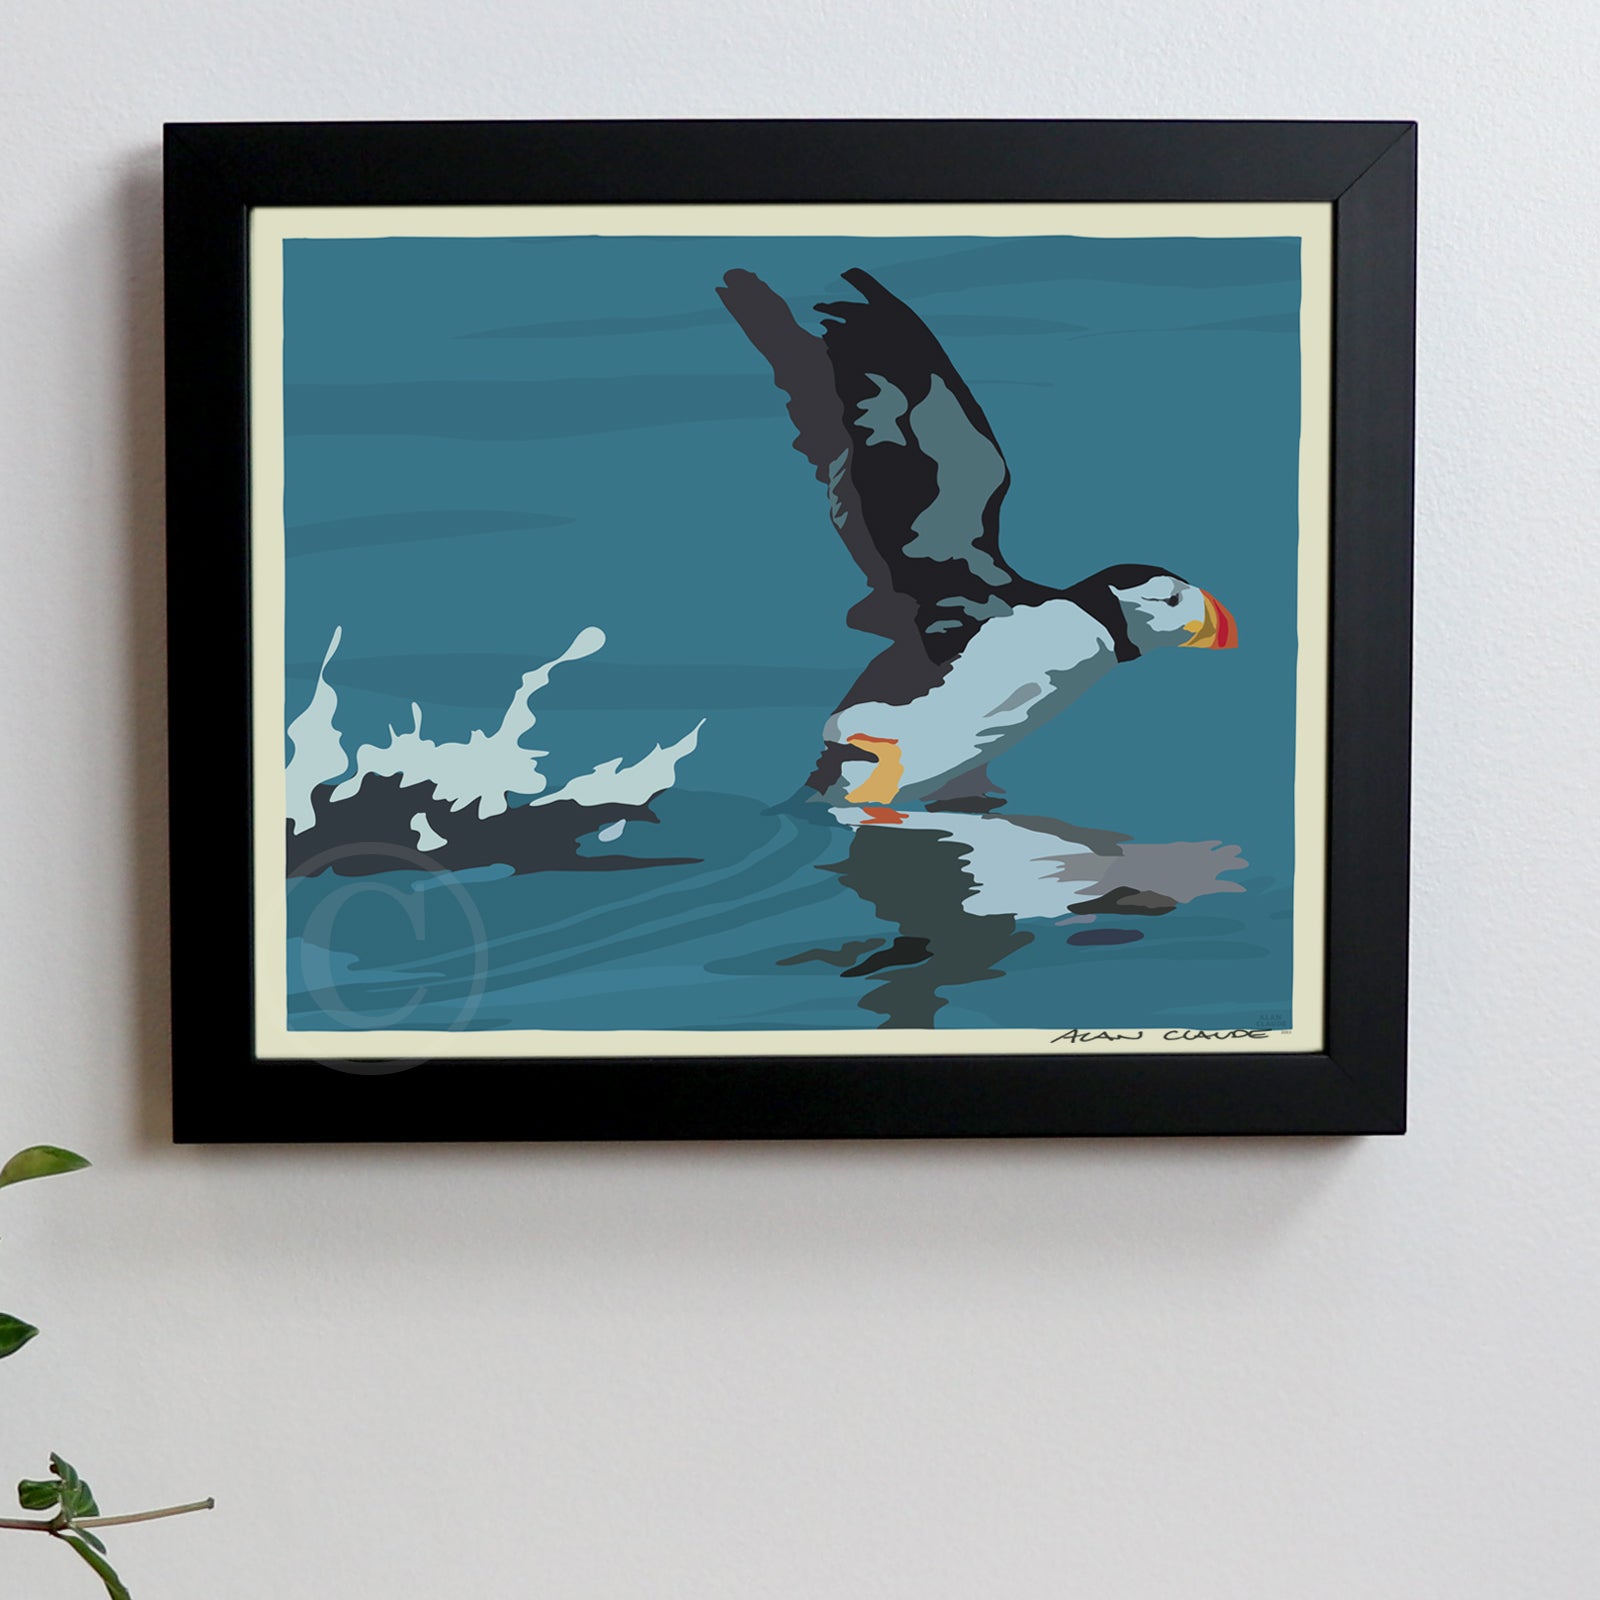 Puffin Takes Flight Art Print 8" x 10" Horizontal Framed Wall Poster - Maine